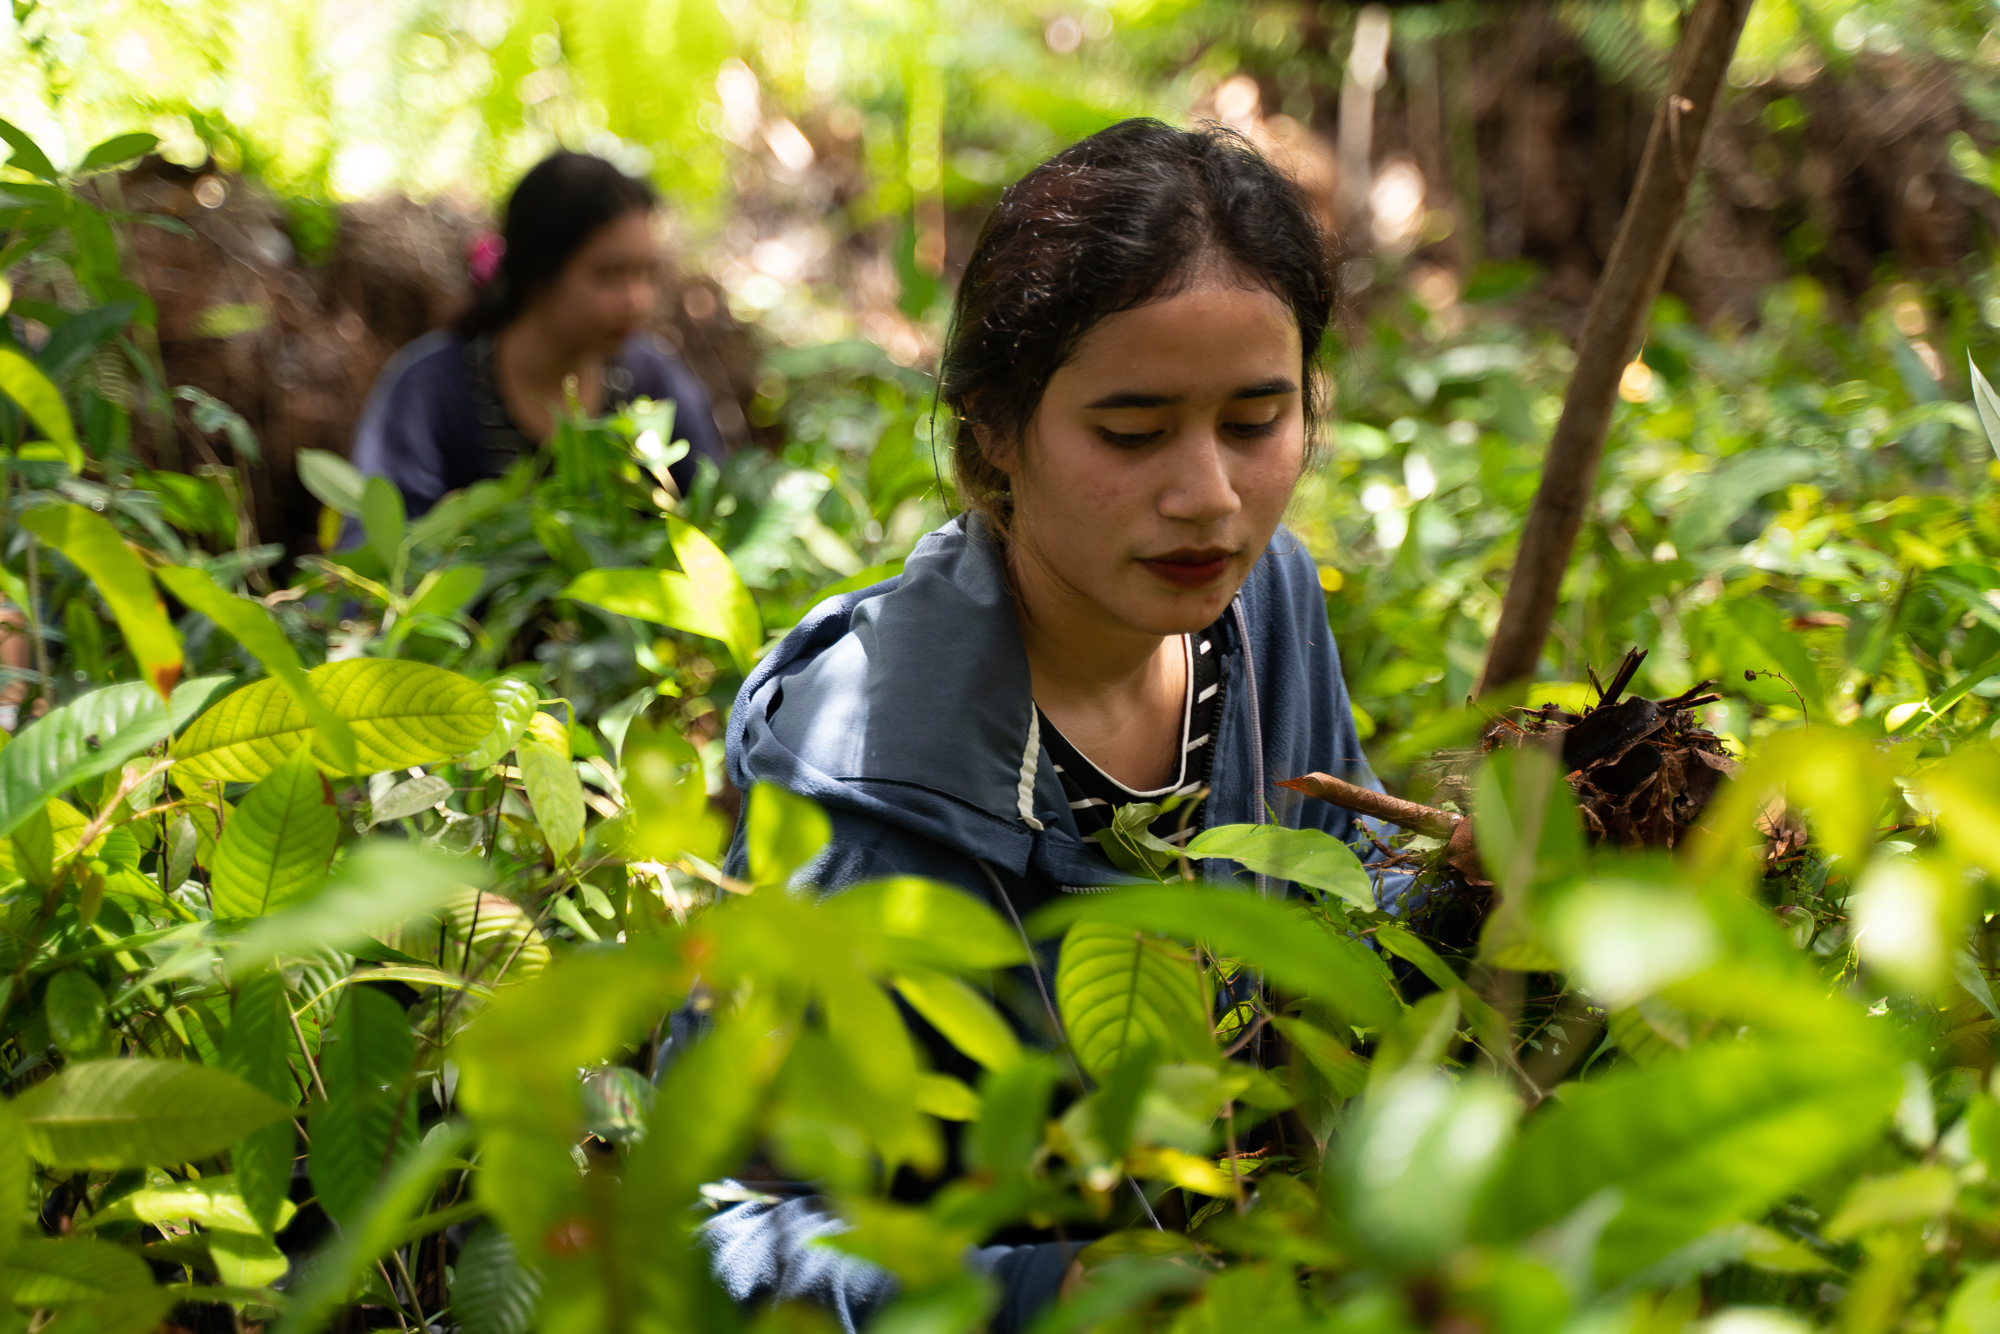 A young women kneels and works in a field of rainforest plants